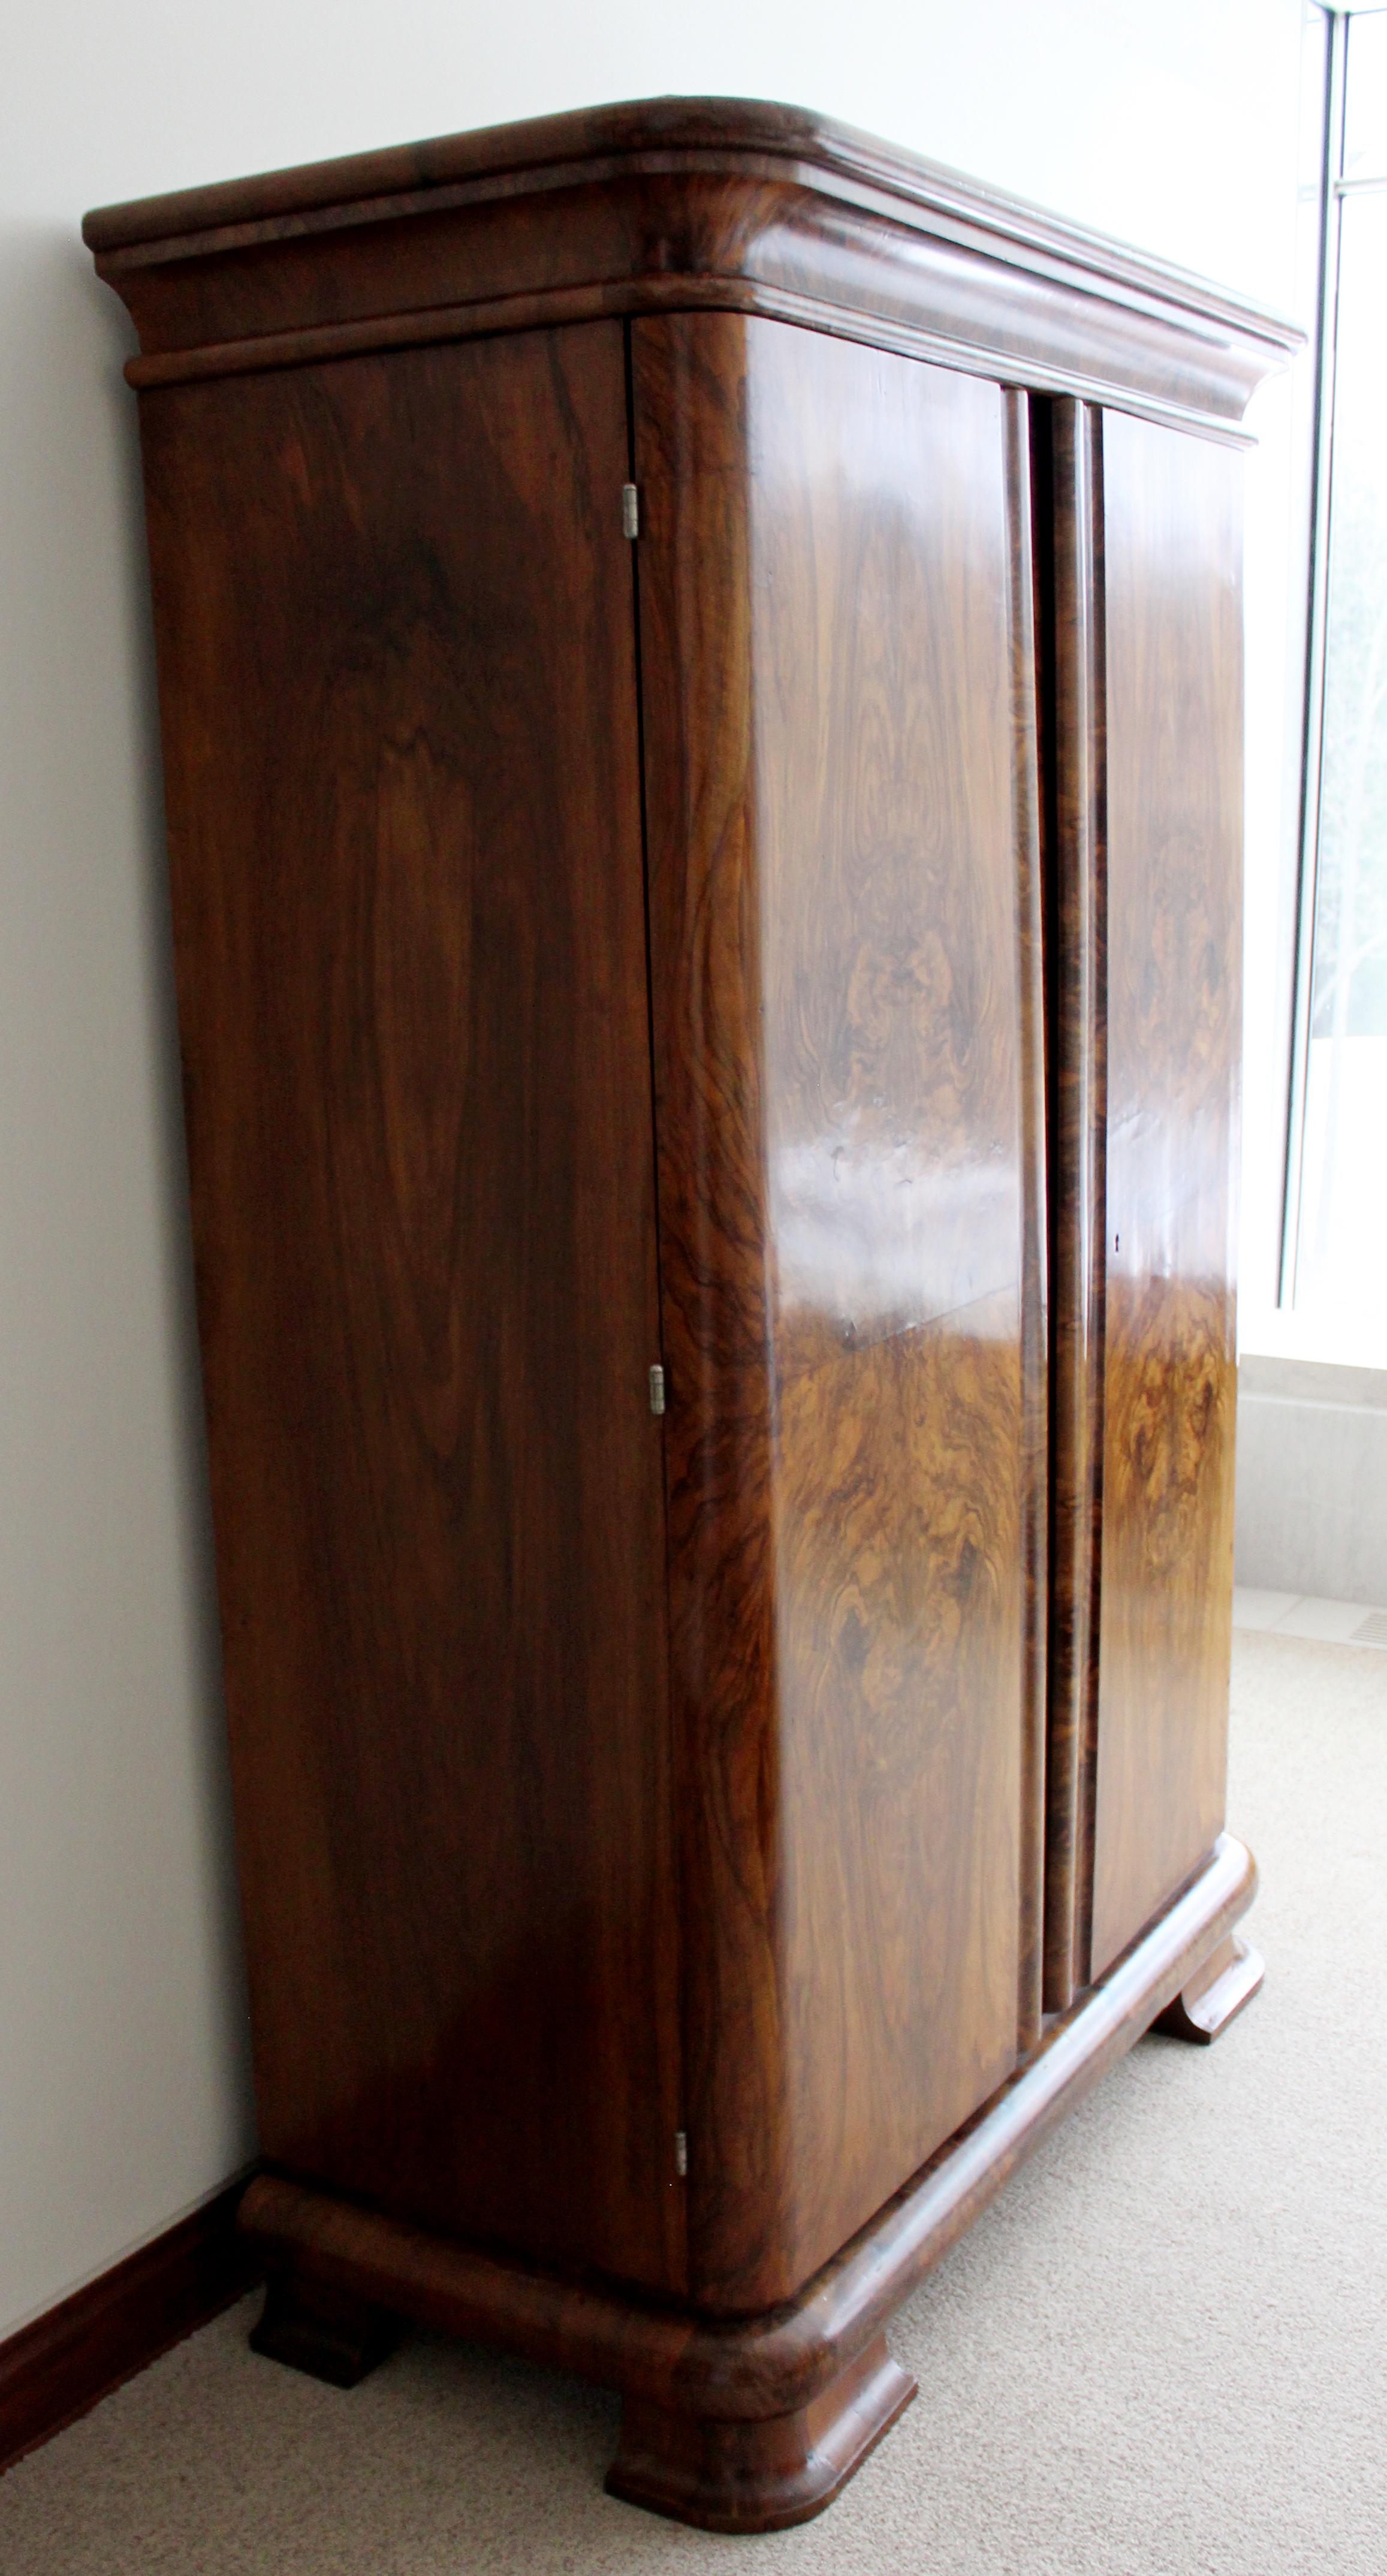 For your consideration is a beautiful, vintage tall, burl wood bookmatched panel cabinet armoire wardrobe unit, circa 1940s. In very good vintage condition. The dimensions are 51